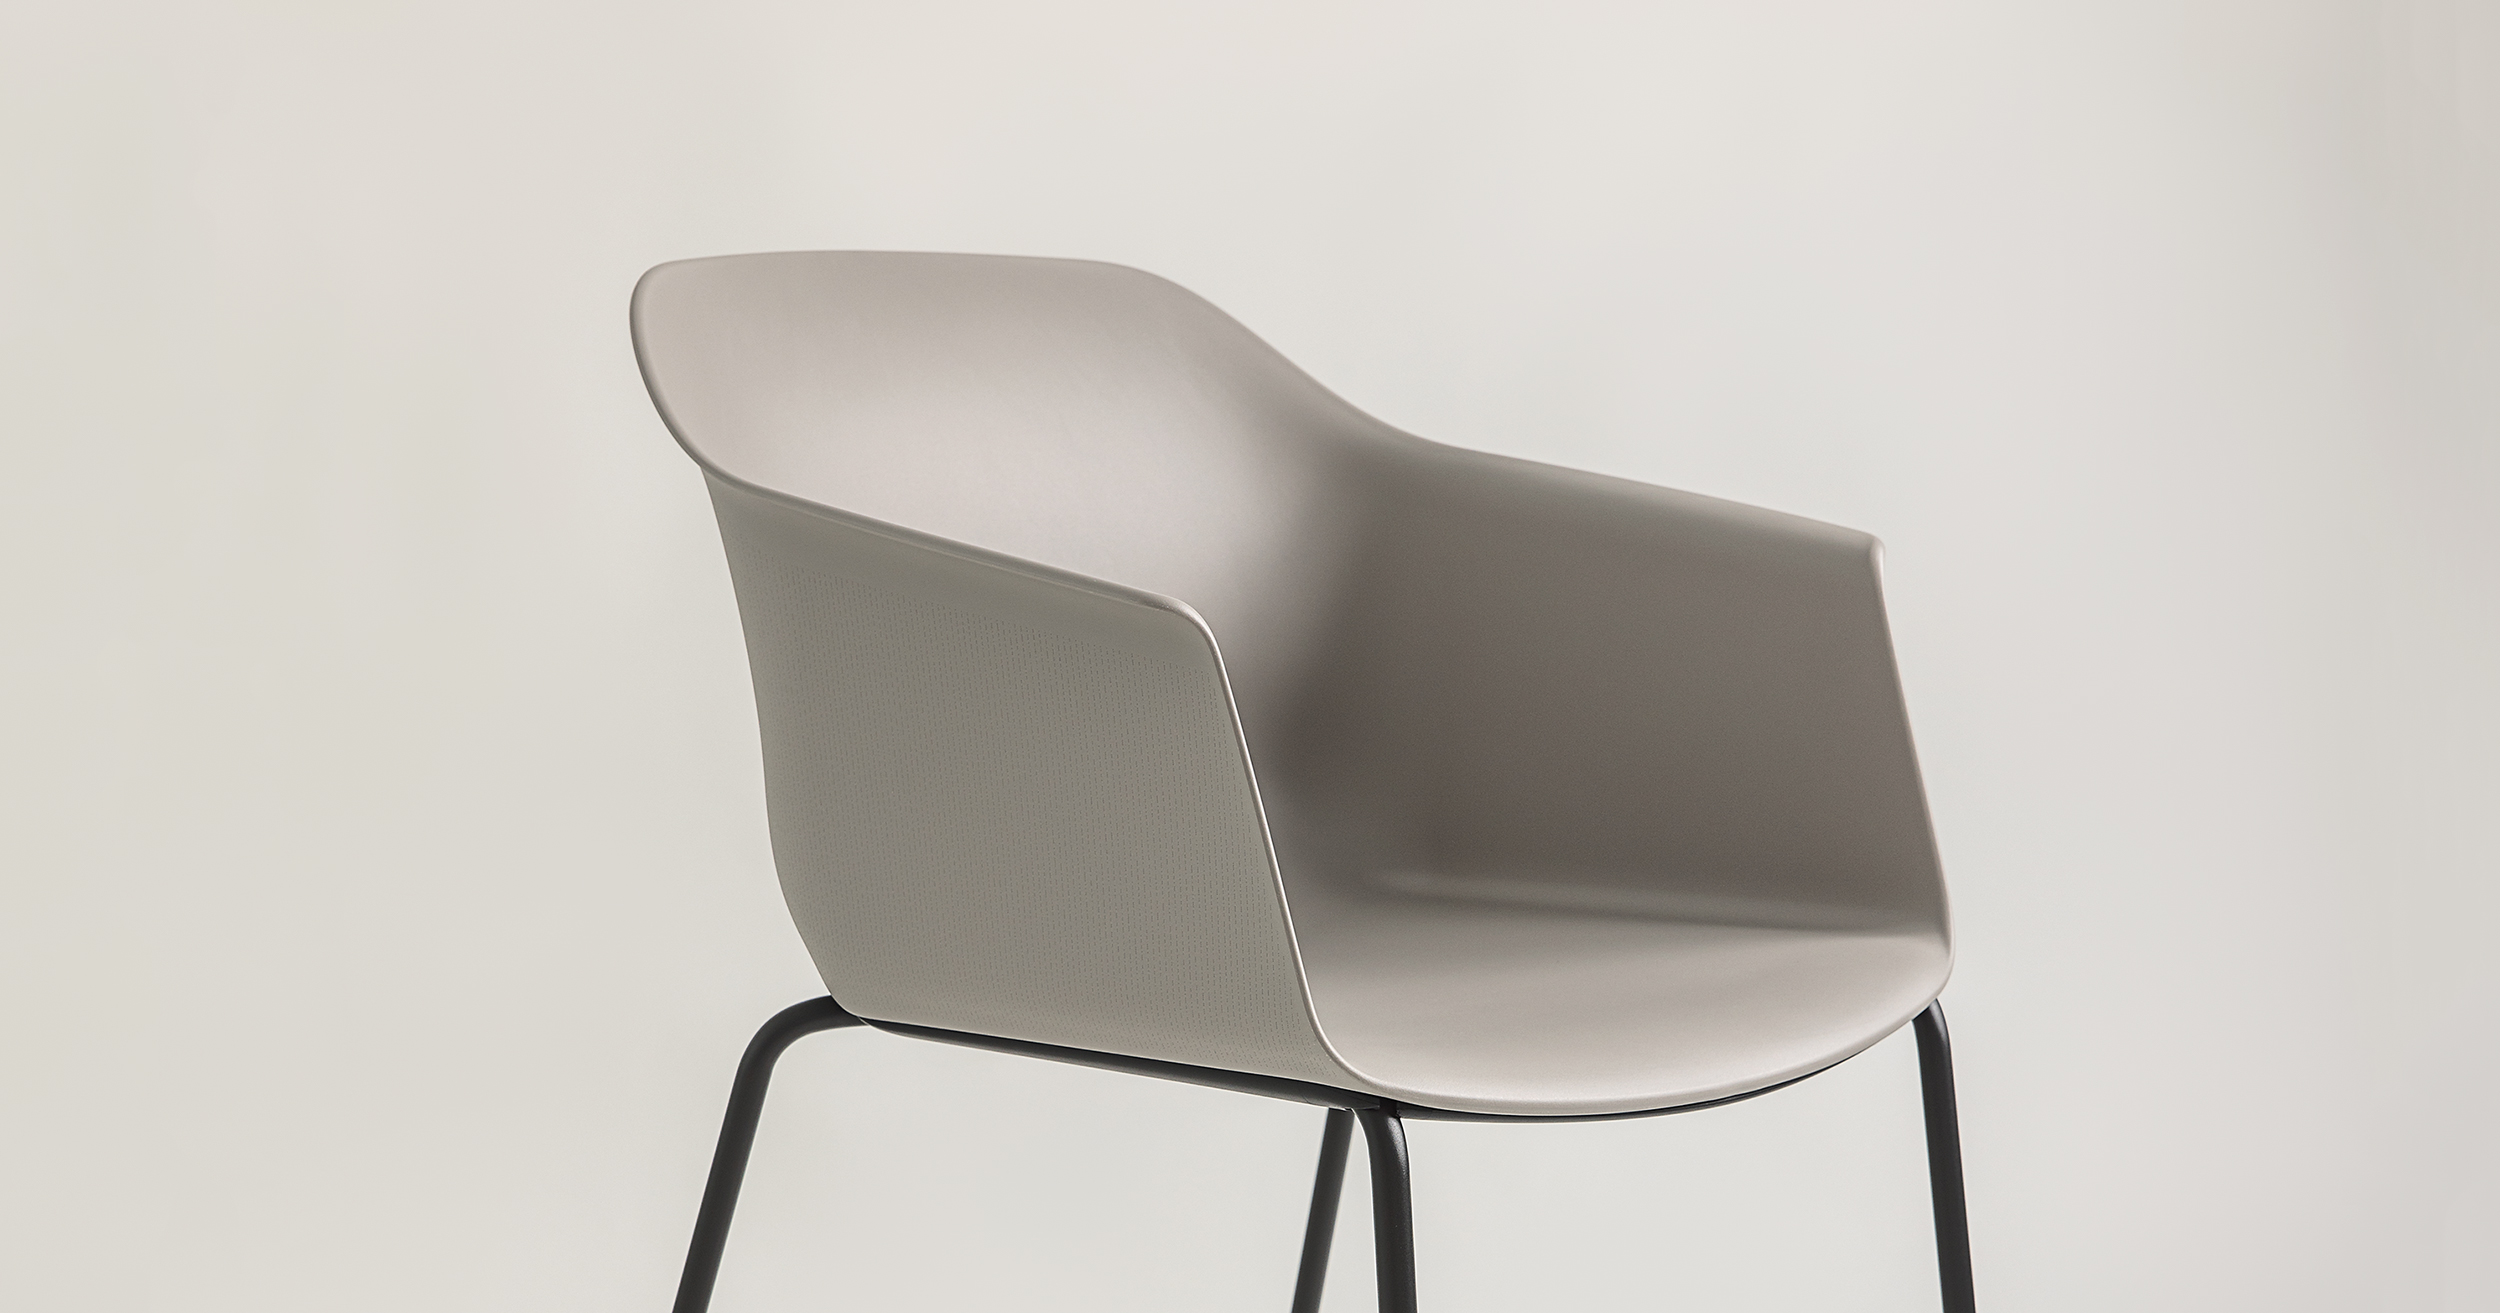 A modern, minimalist chair named Noom 60 designed by Alegre Design for Actiu. The chair features a curved, bucket-style seat in a smooth, light gray color. It has thin, black metal legs and integrated armrests. This sleek and contemporary chair is suitable for various settings such as offices or homes.